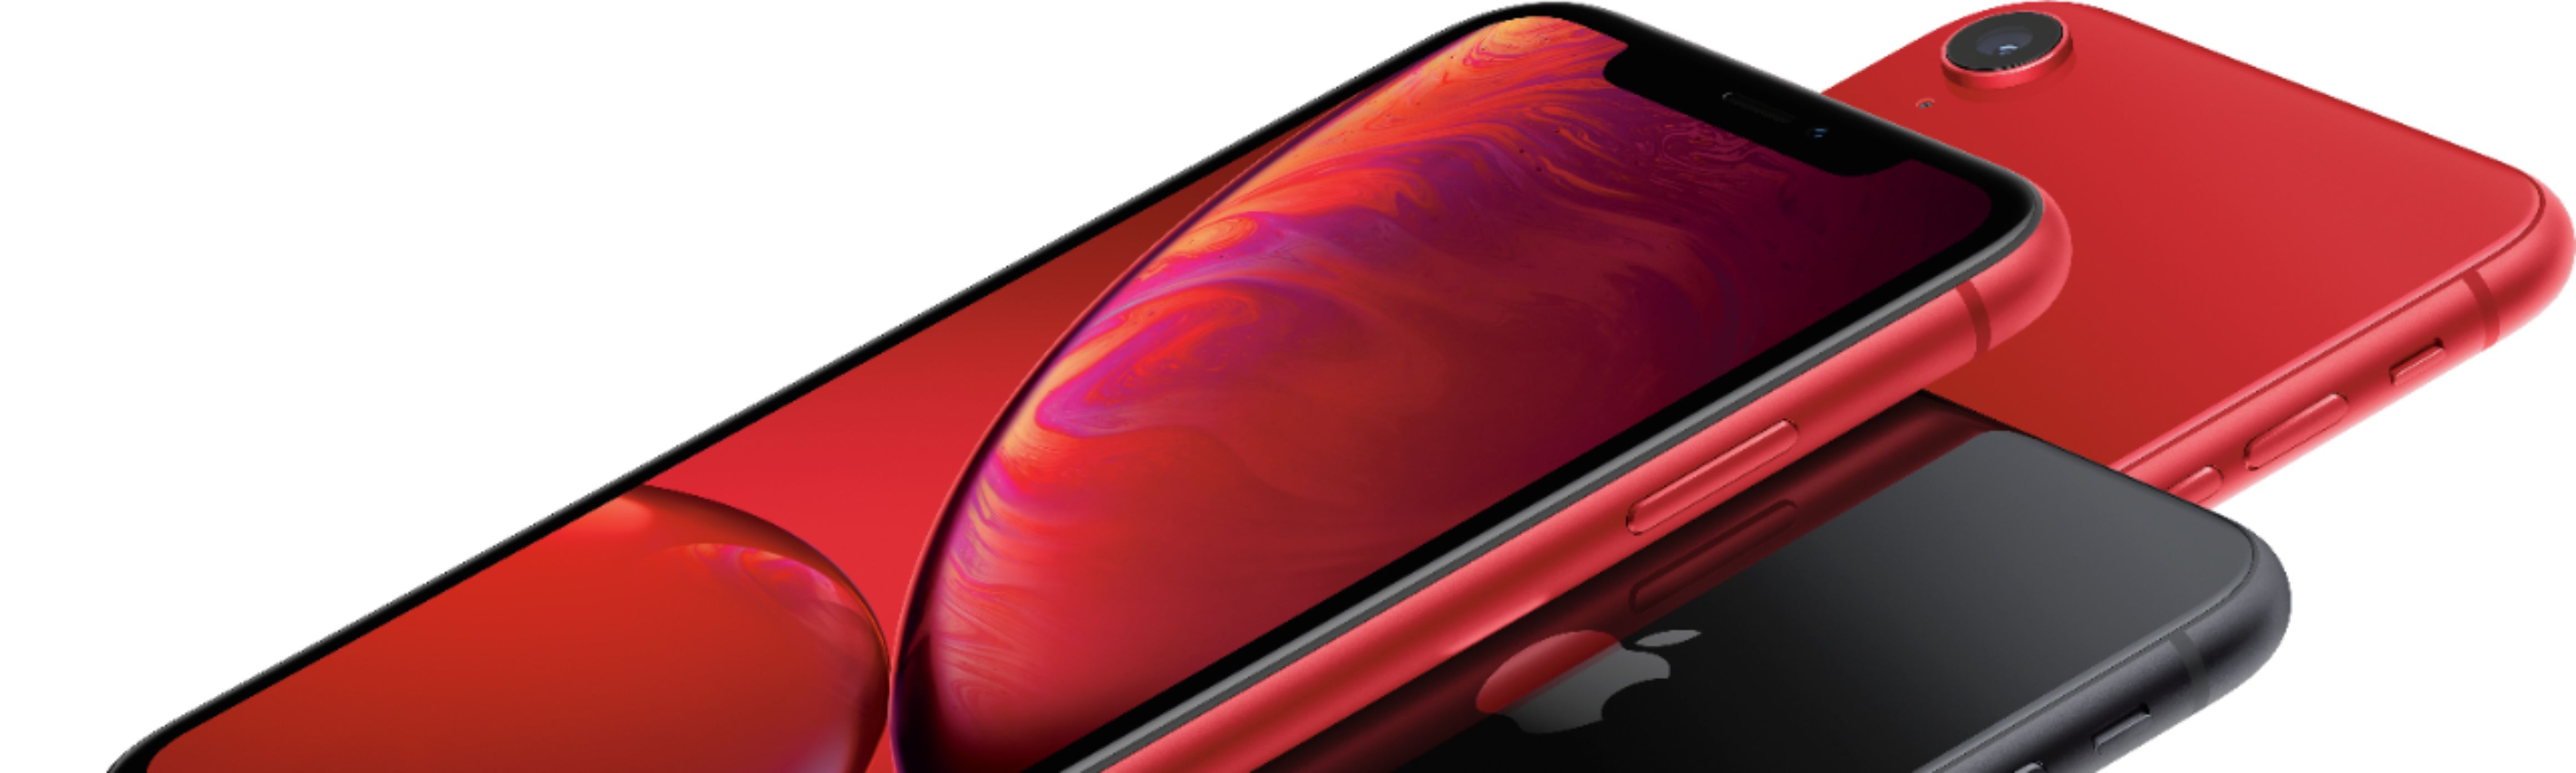 Best Buy: Apple iPhone XR with 64GB Memory Cell Phone (Unlocked) Red  MT322LL/A